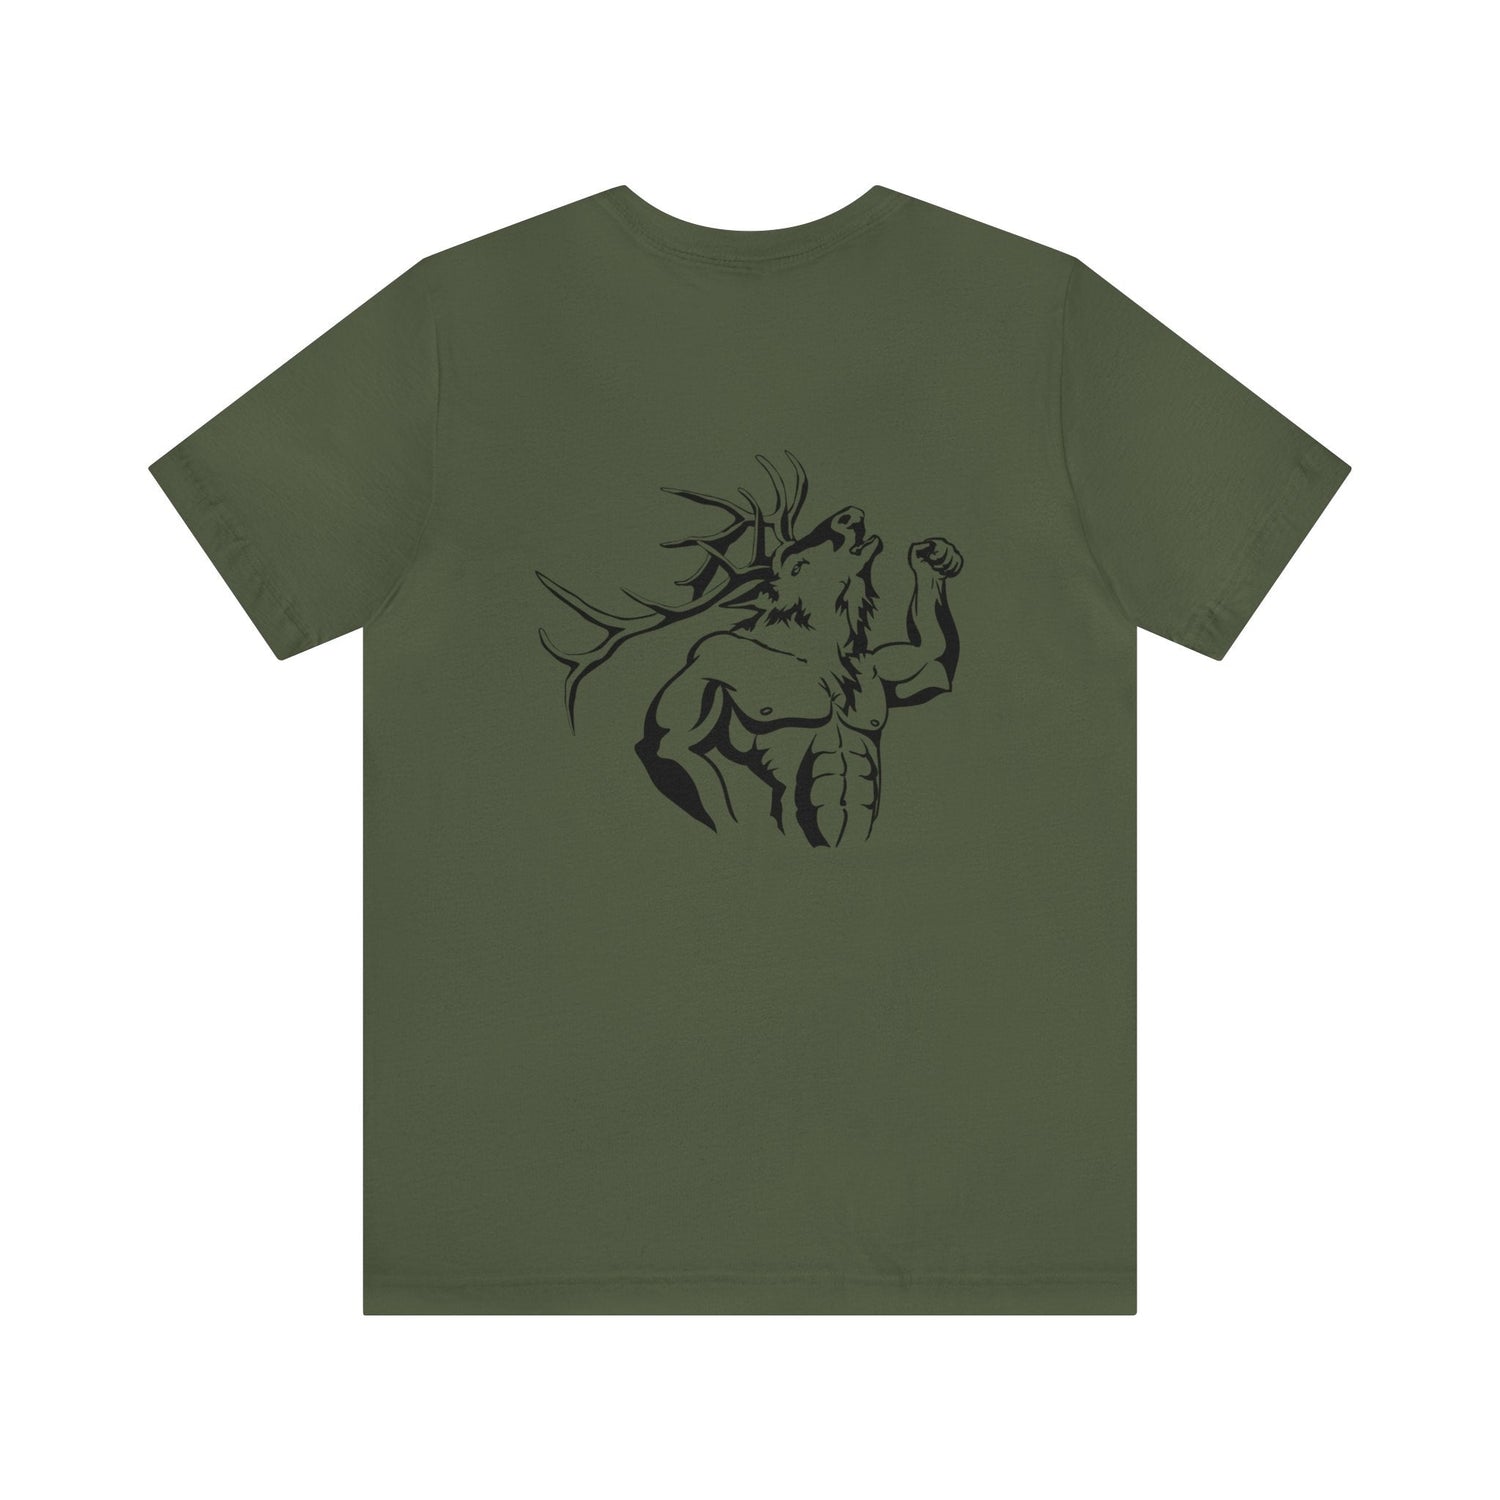 Western elk hunting t-shirt, color military green, back design placement